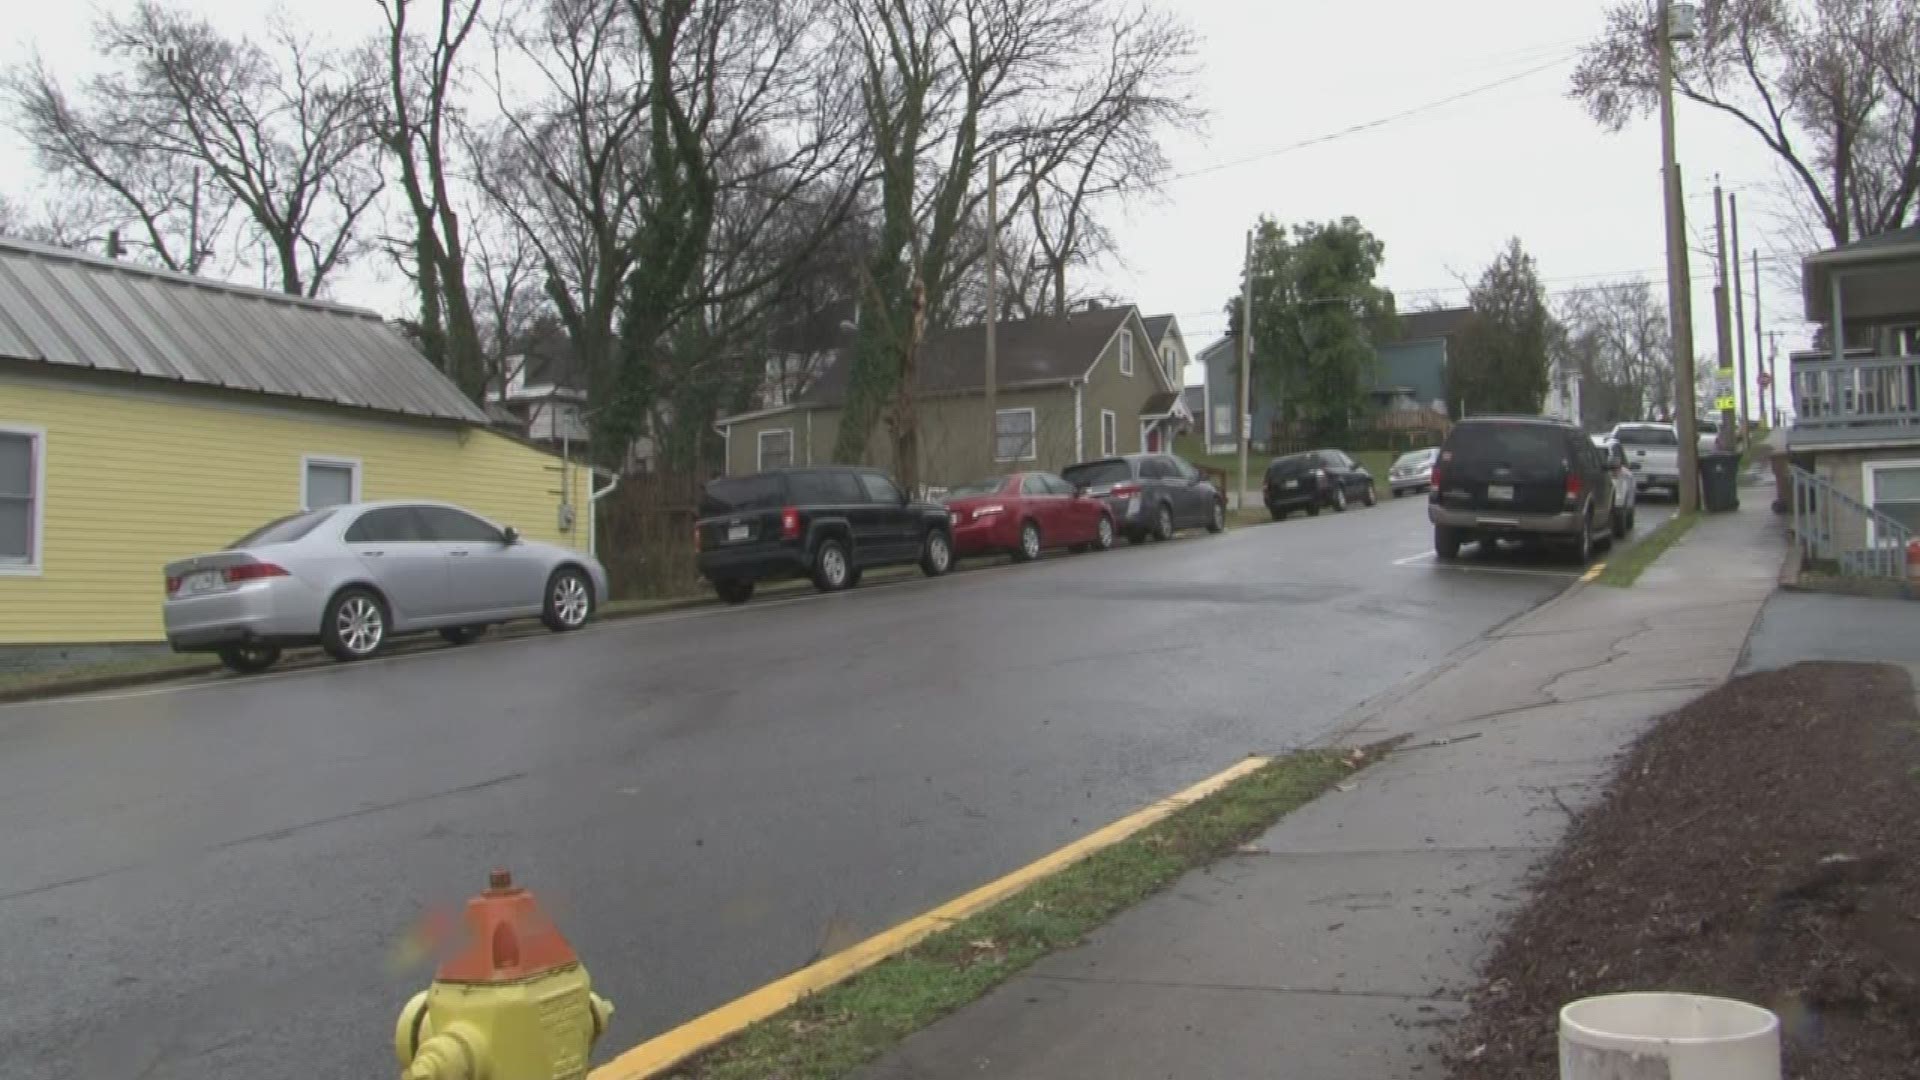 Another shooting in the Fort Sanders neighborhood has a resident concerned. In the last year, more than 300 crimes have been reported in that small area.